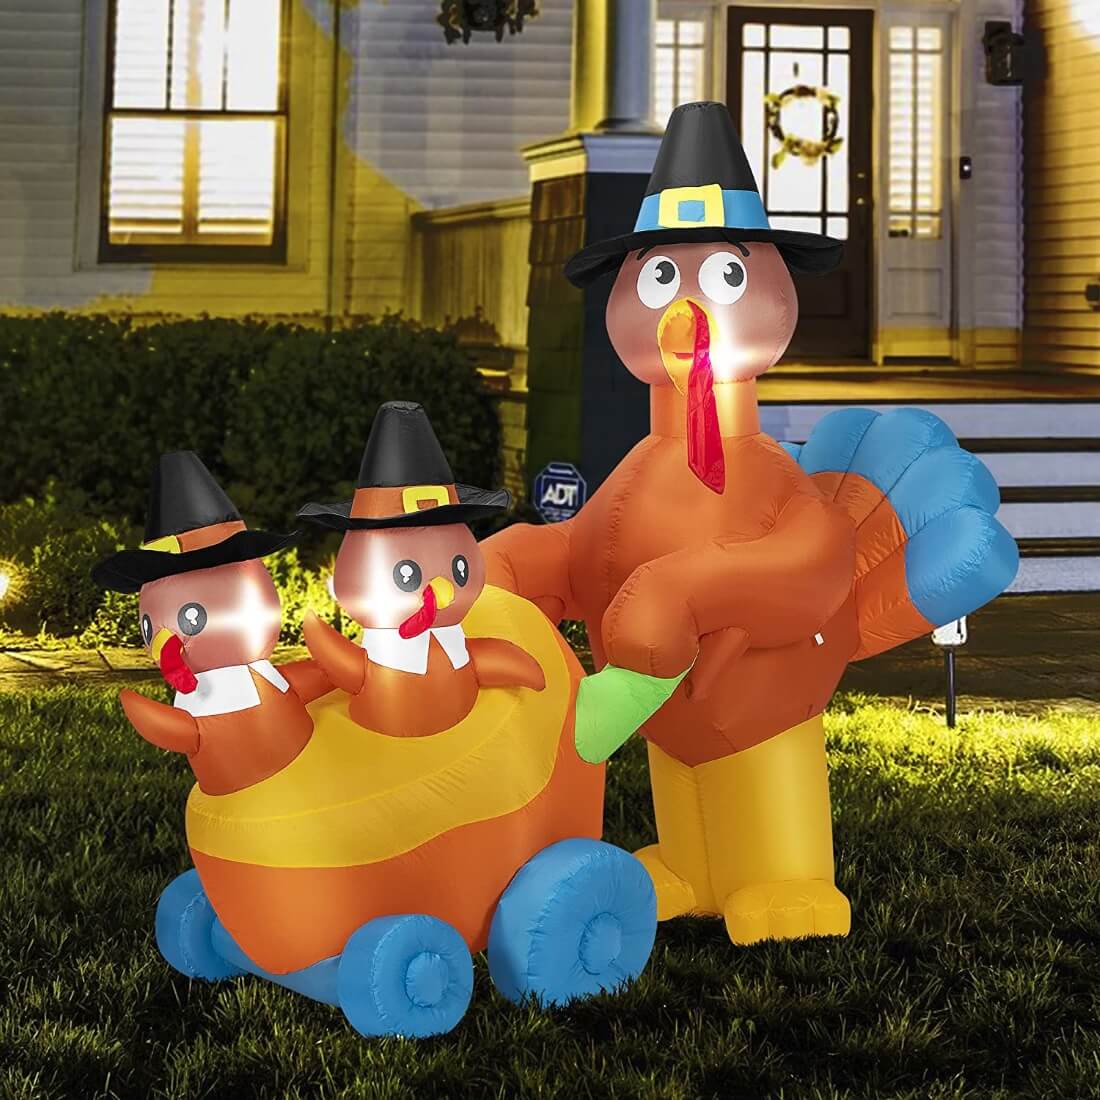 VIVOHOME 5ft Height Happy Thanksgiving Inflatable Turkey with 2 Turkey Chicks in a Cart Built-in LED Lights Blow up Outdoor Lawn Yard Decoration